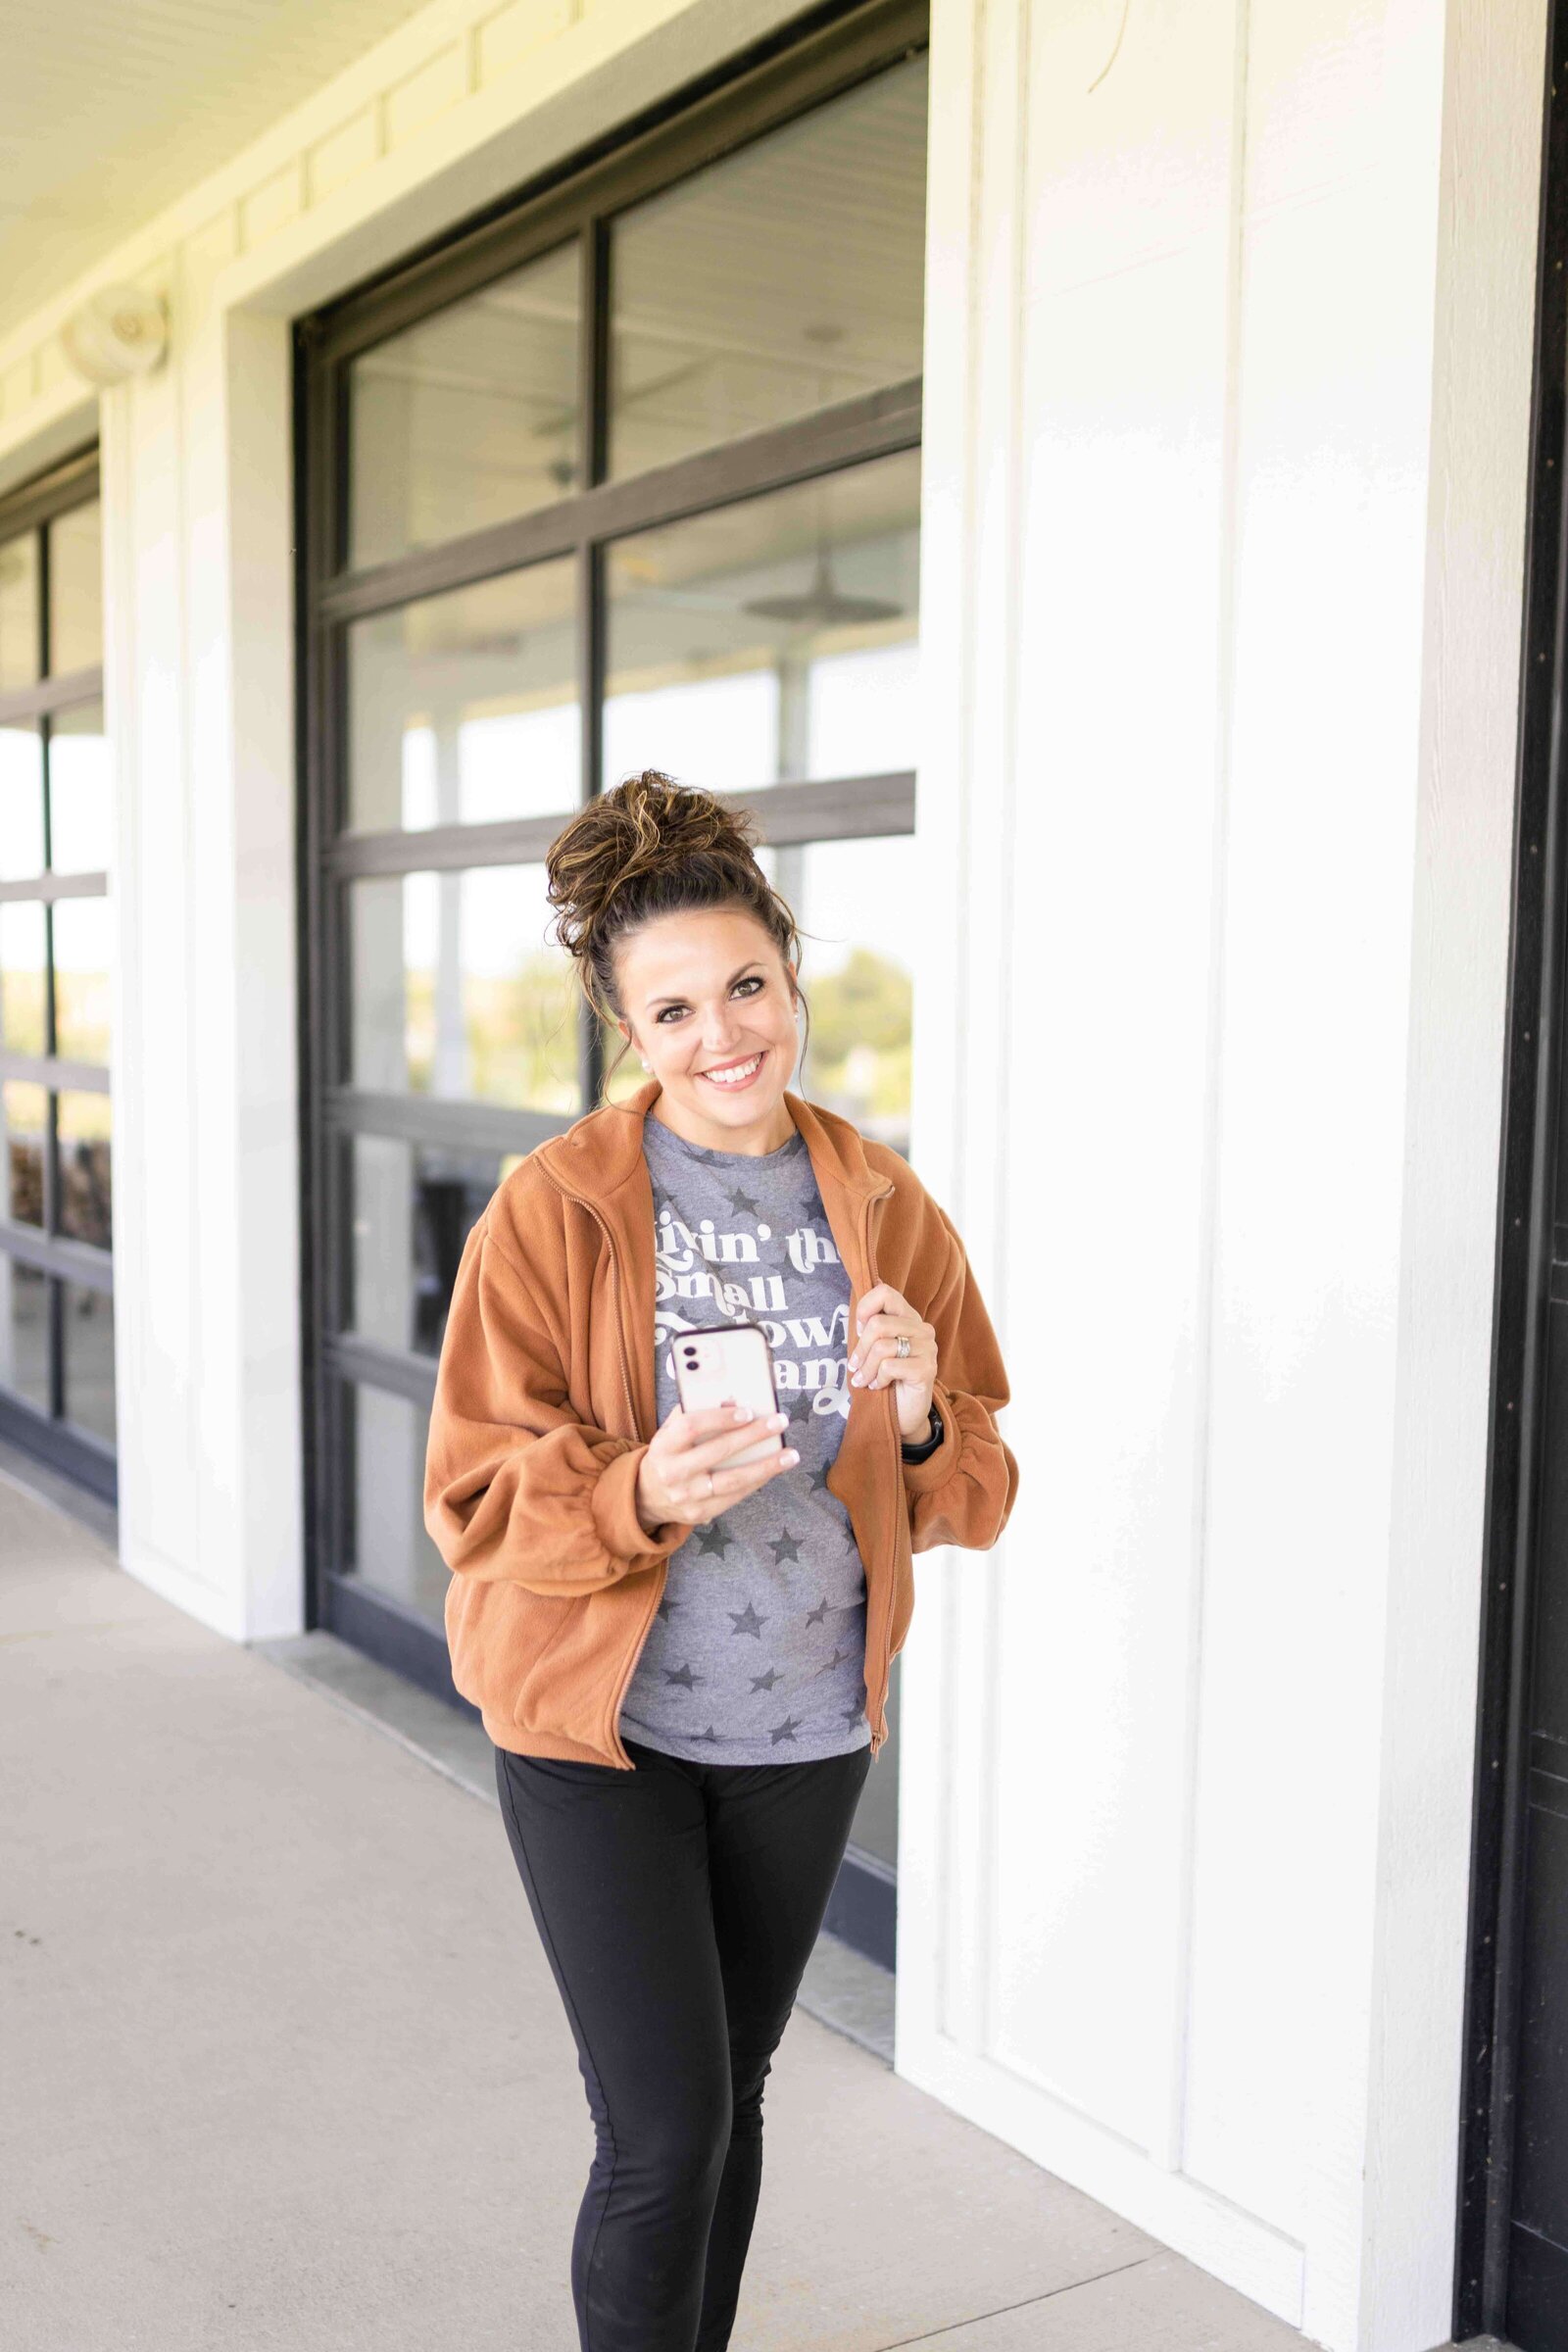 Woman smiling outside wearing small town tshirt and brown jacket holding cell phone